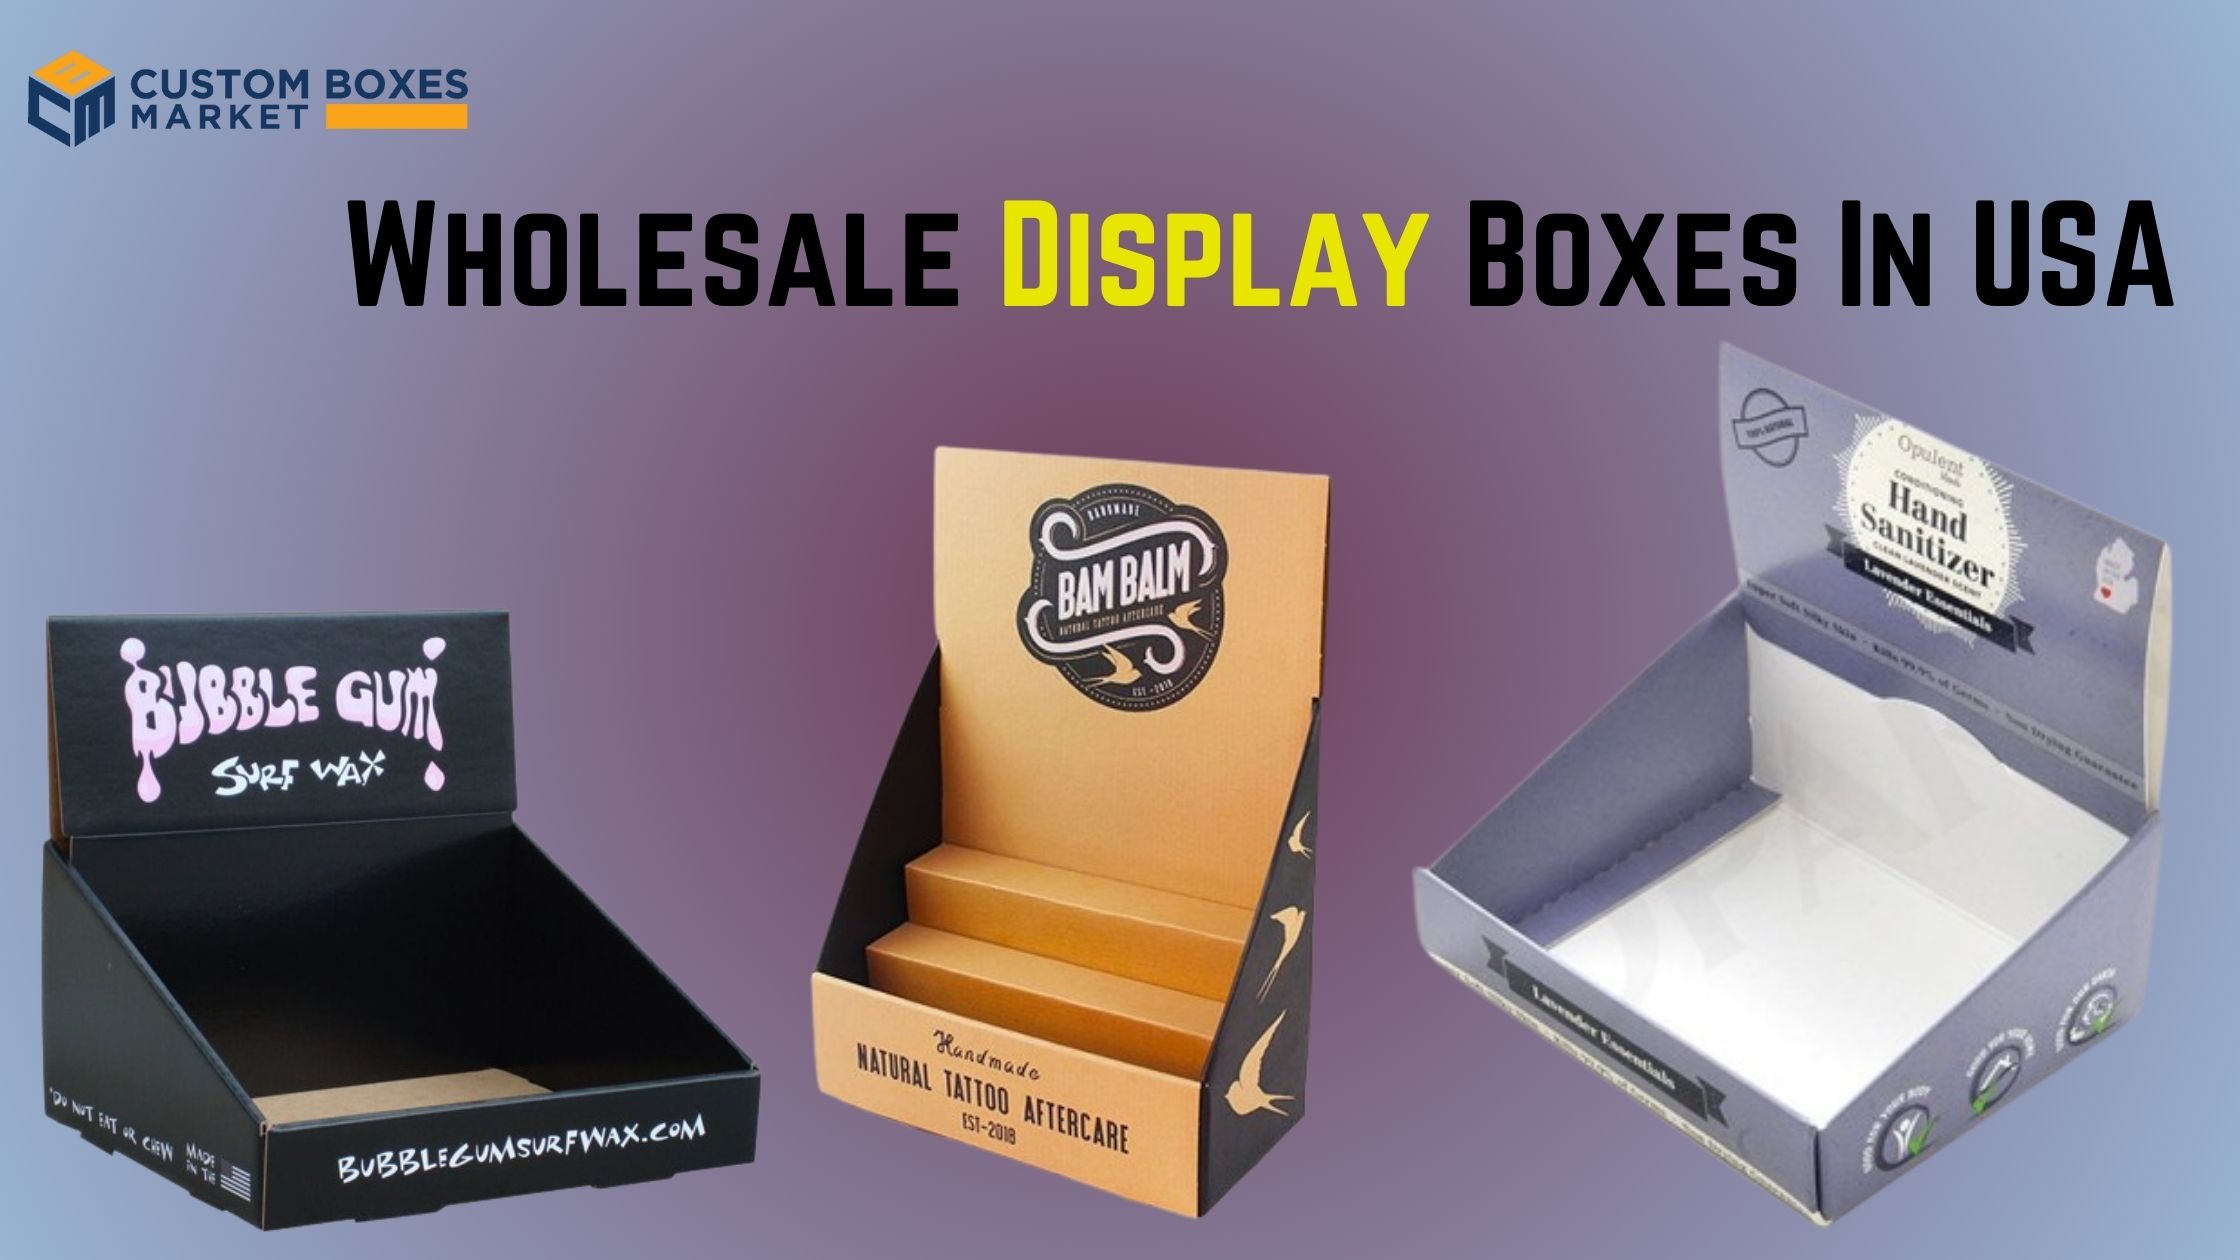 Transform Products With Custom Printed Display Boxes